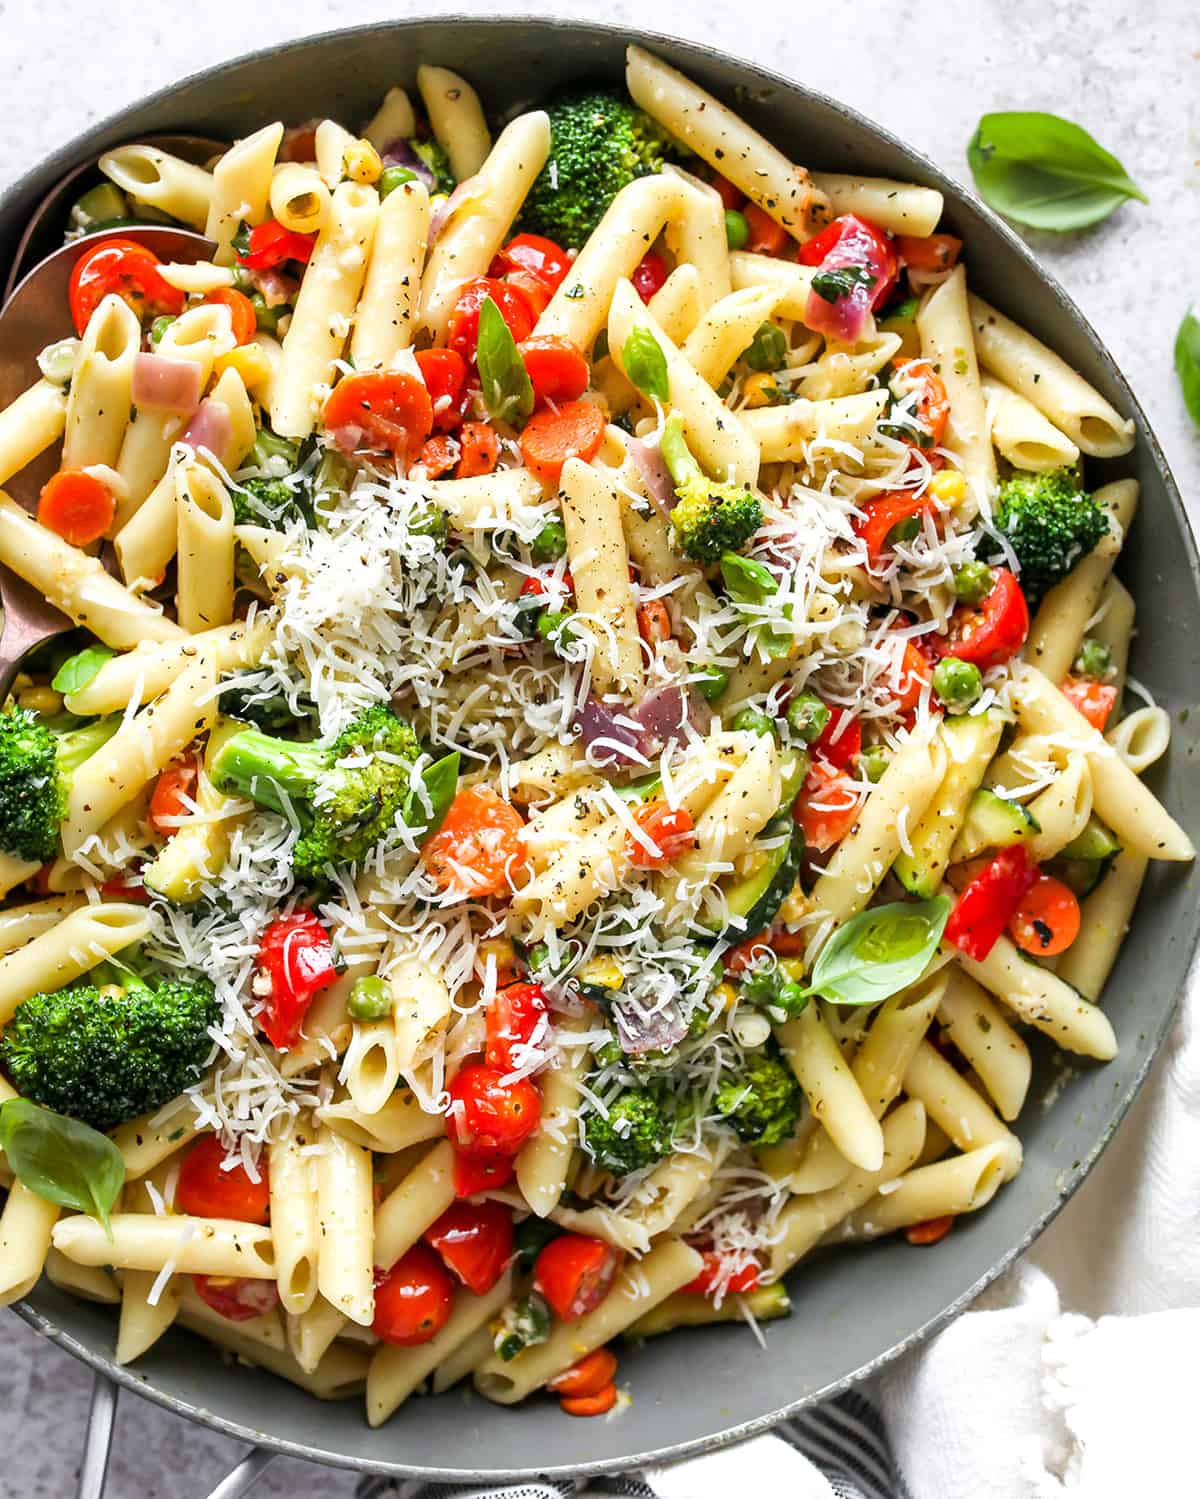 Pasta Primavera Recipe in a pan topped with parmesan cheese